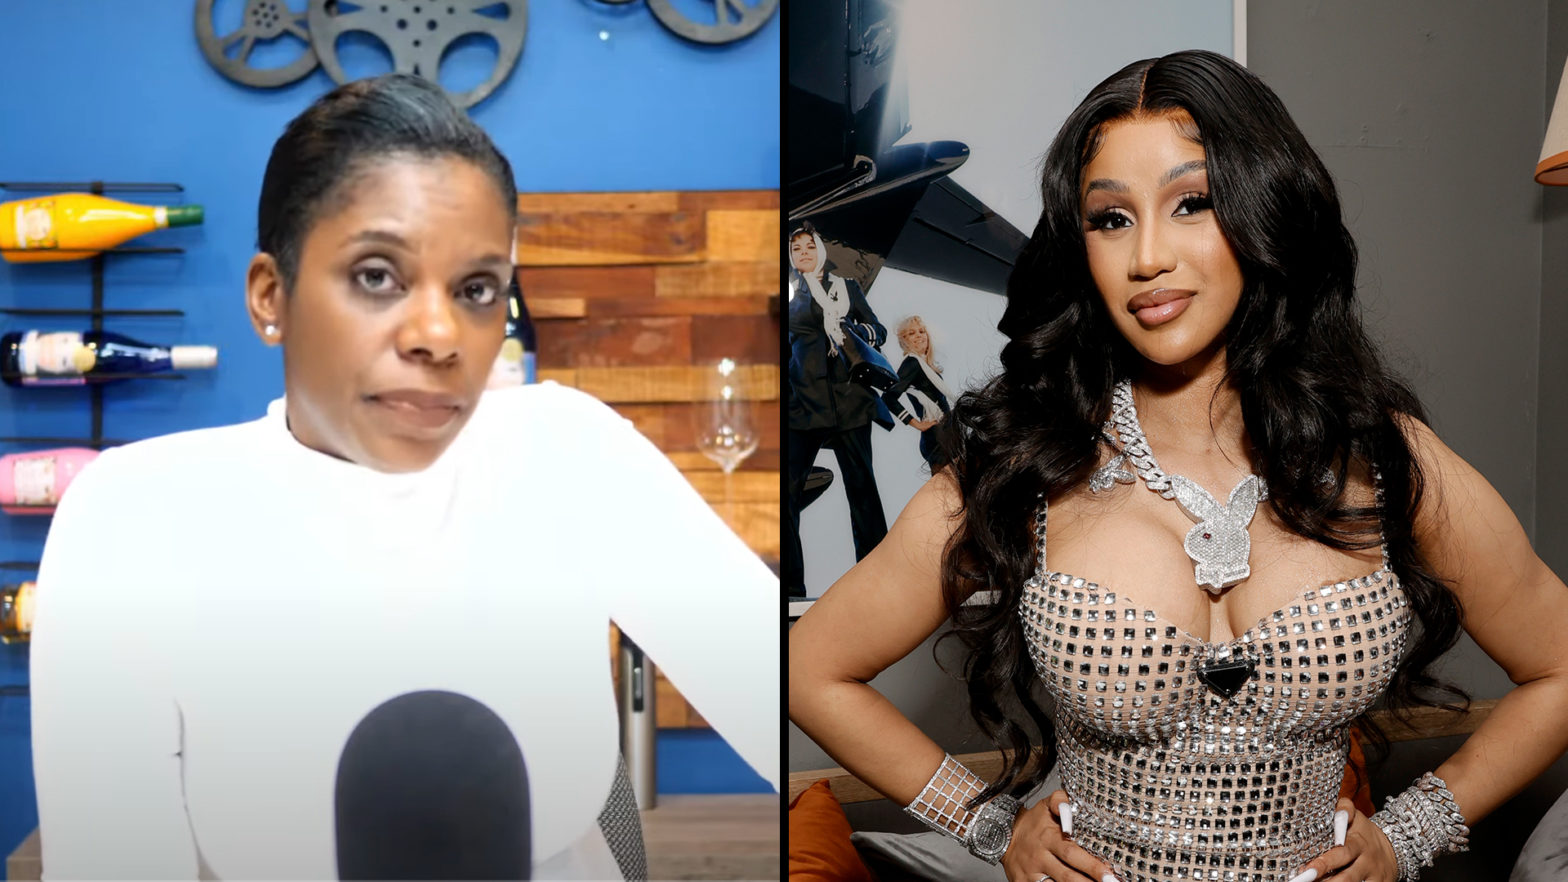 Judge Orders For YouTuber Tasha K To Pay Cardi B $4M Or Secure A Bond For The Entire Amount